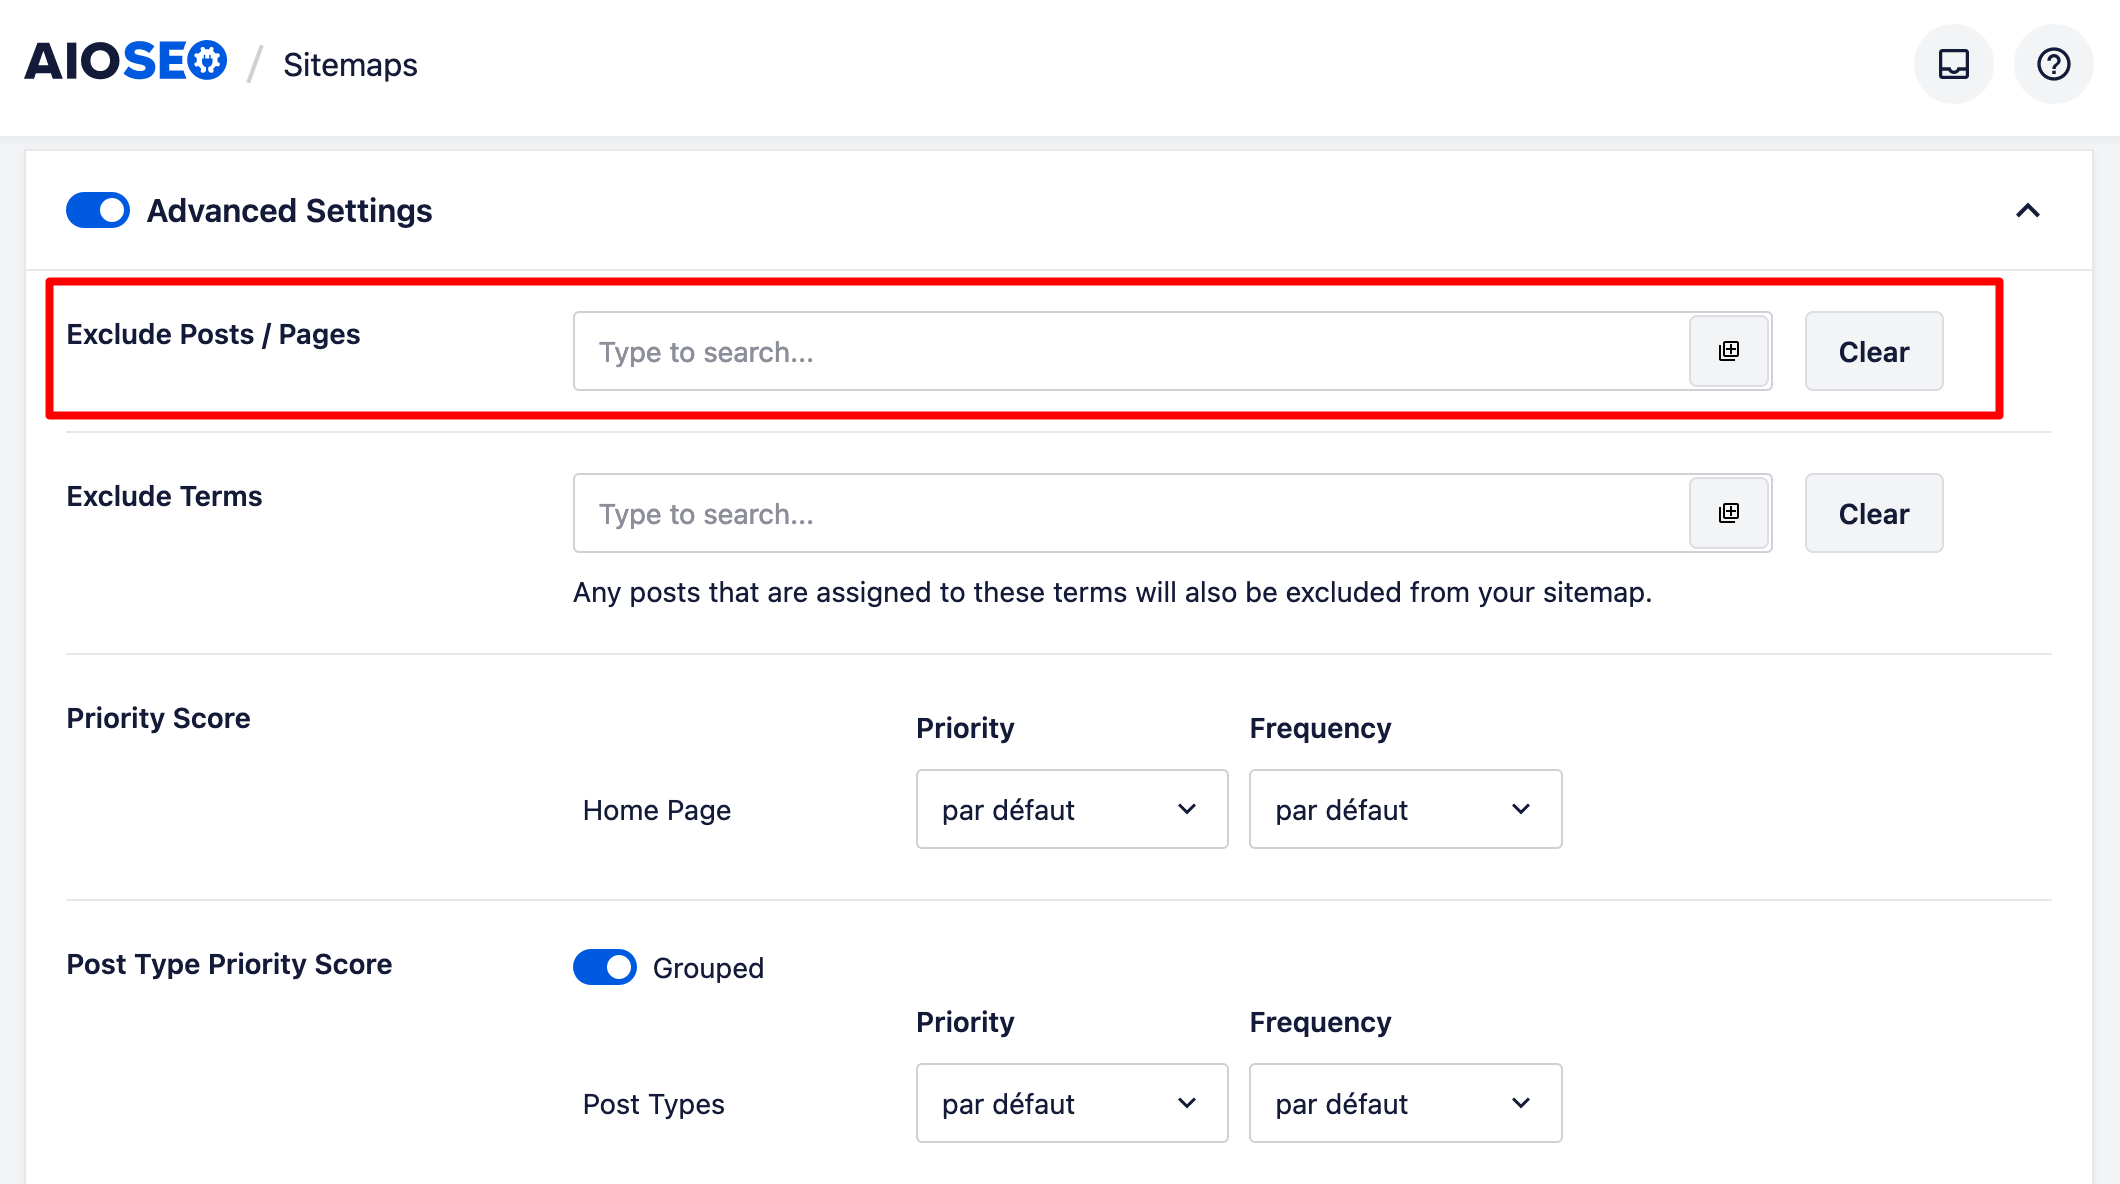 AIOSEO allows you to exclude certain posts and pages from your sitemap.